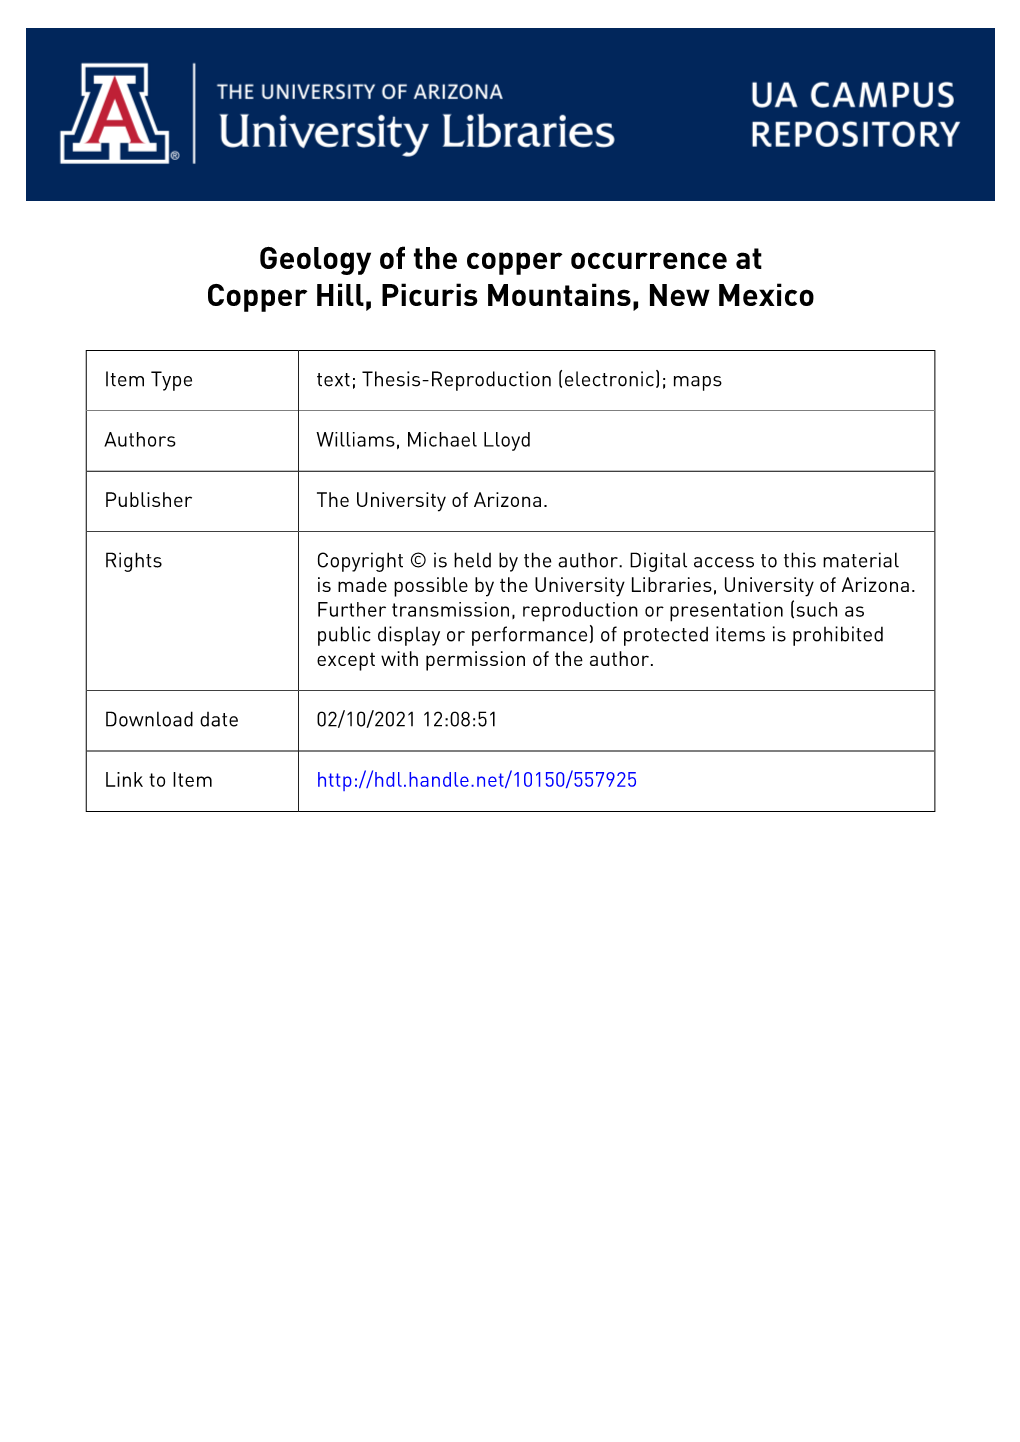 Geology of the Copper Occurrence at Copper Hill, Picuris Mountains, New Mexico